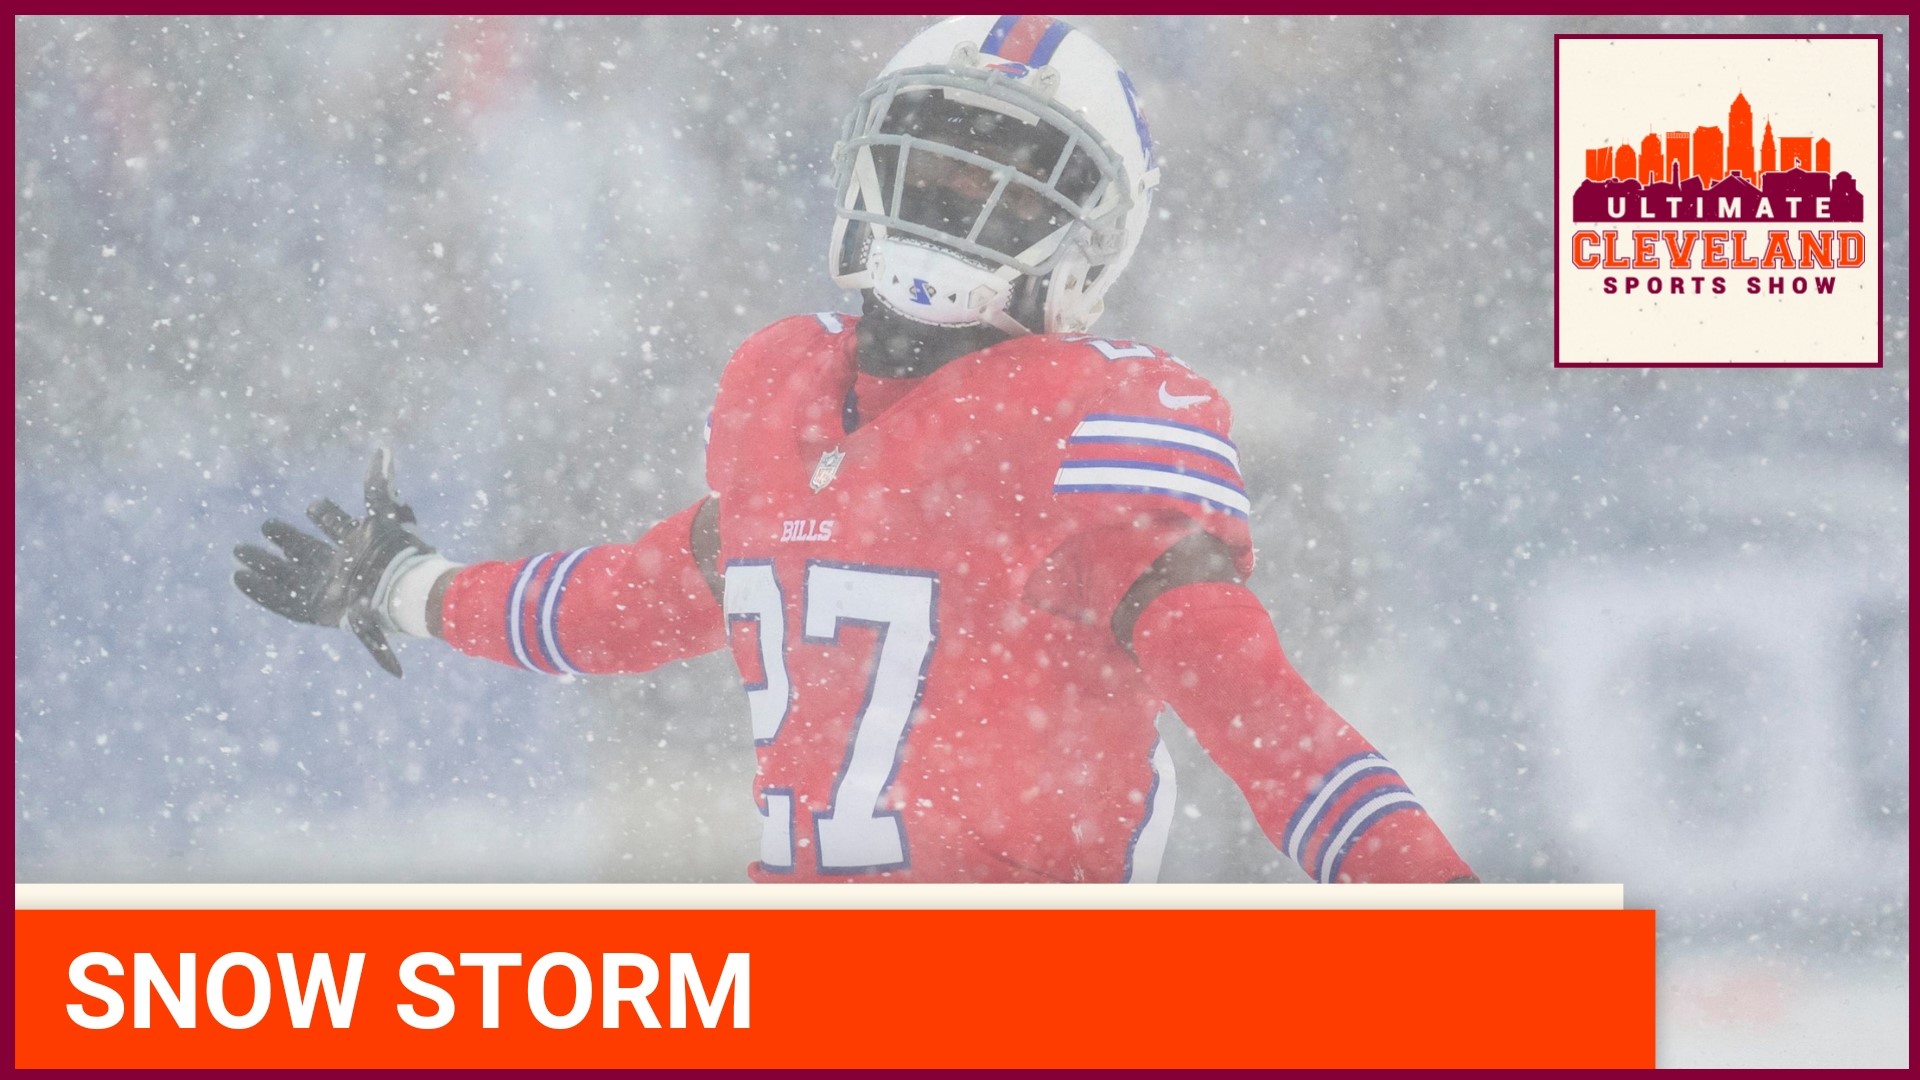 THUNDERSNOW, Should the Cleveland Browns/Buffalo Bills game be moved?